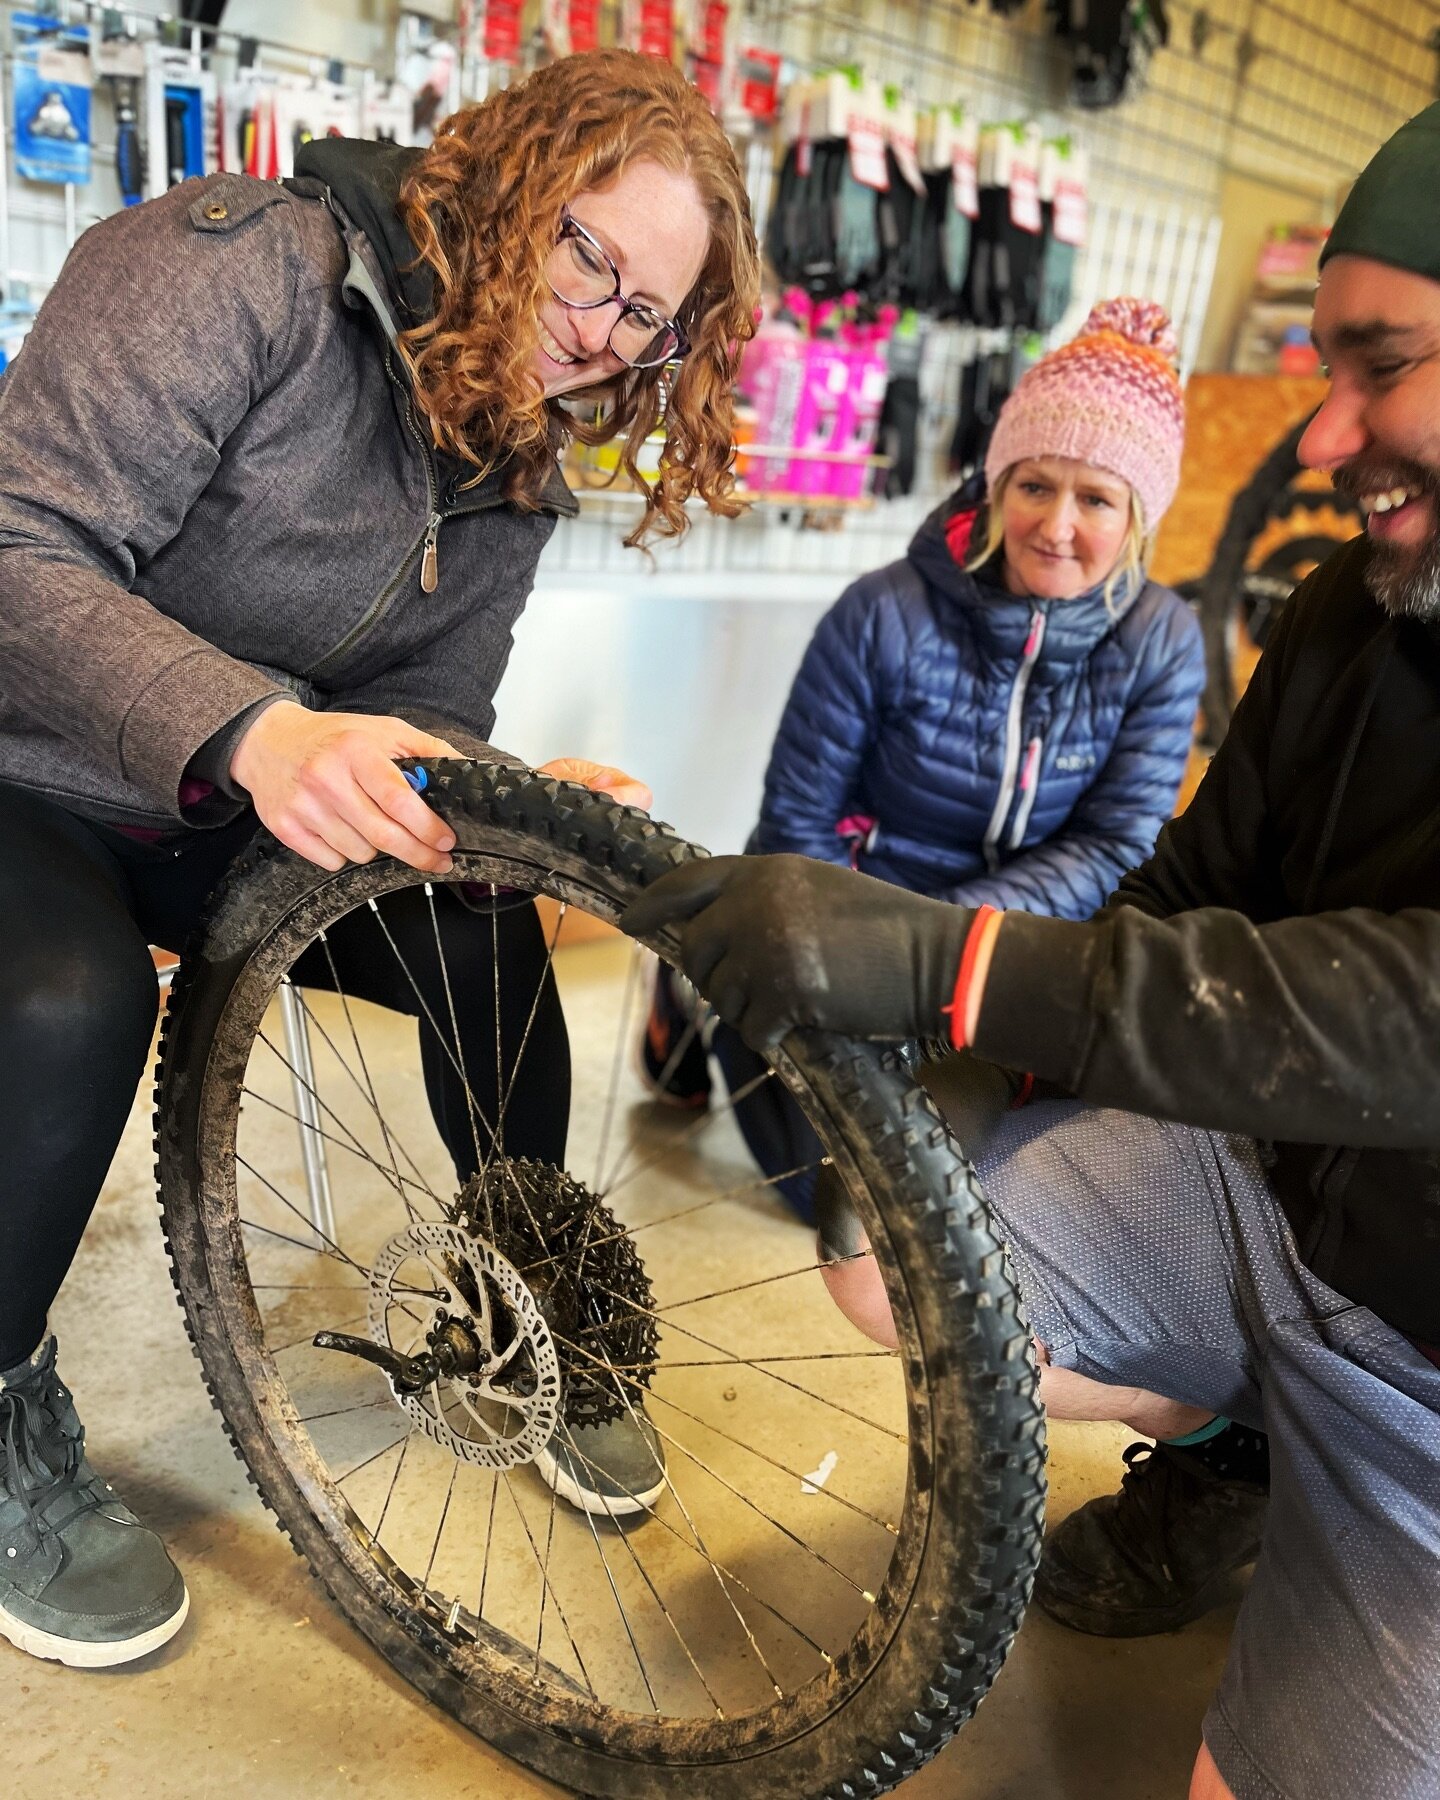 Great morning learning bike basics and trail side repairs. Knowledge is power &hellip; empower yourself. 

Thanks @pedalprogression for another great maintenance course this morning (especially the pyrotechnics!🔥😜)

#bikemaintenance #trailsiderepai